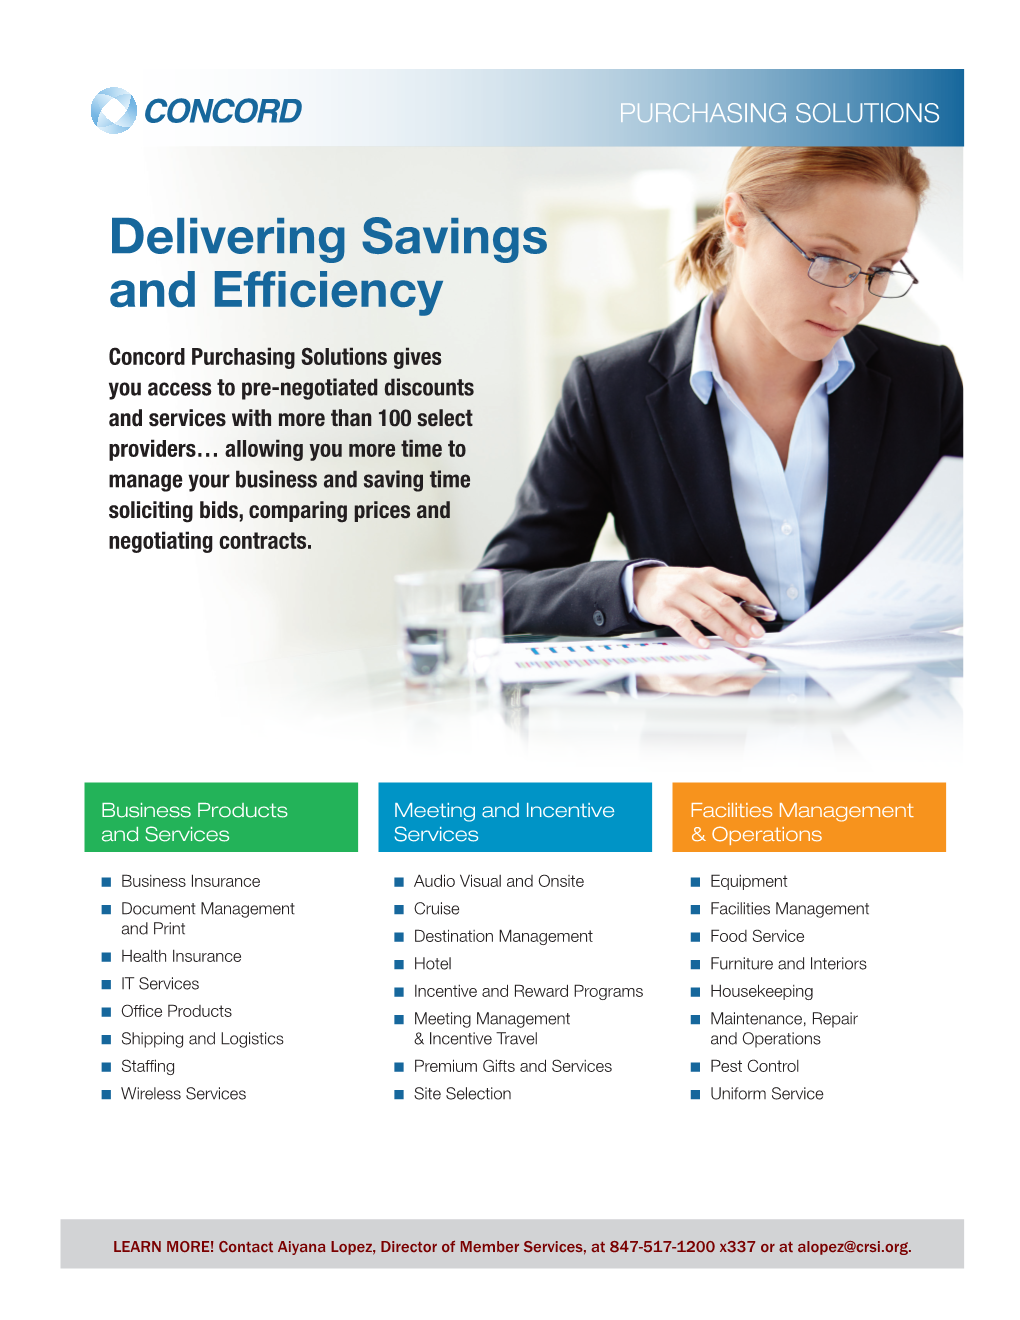 Delivering Savings and Efficiency